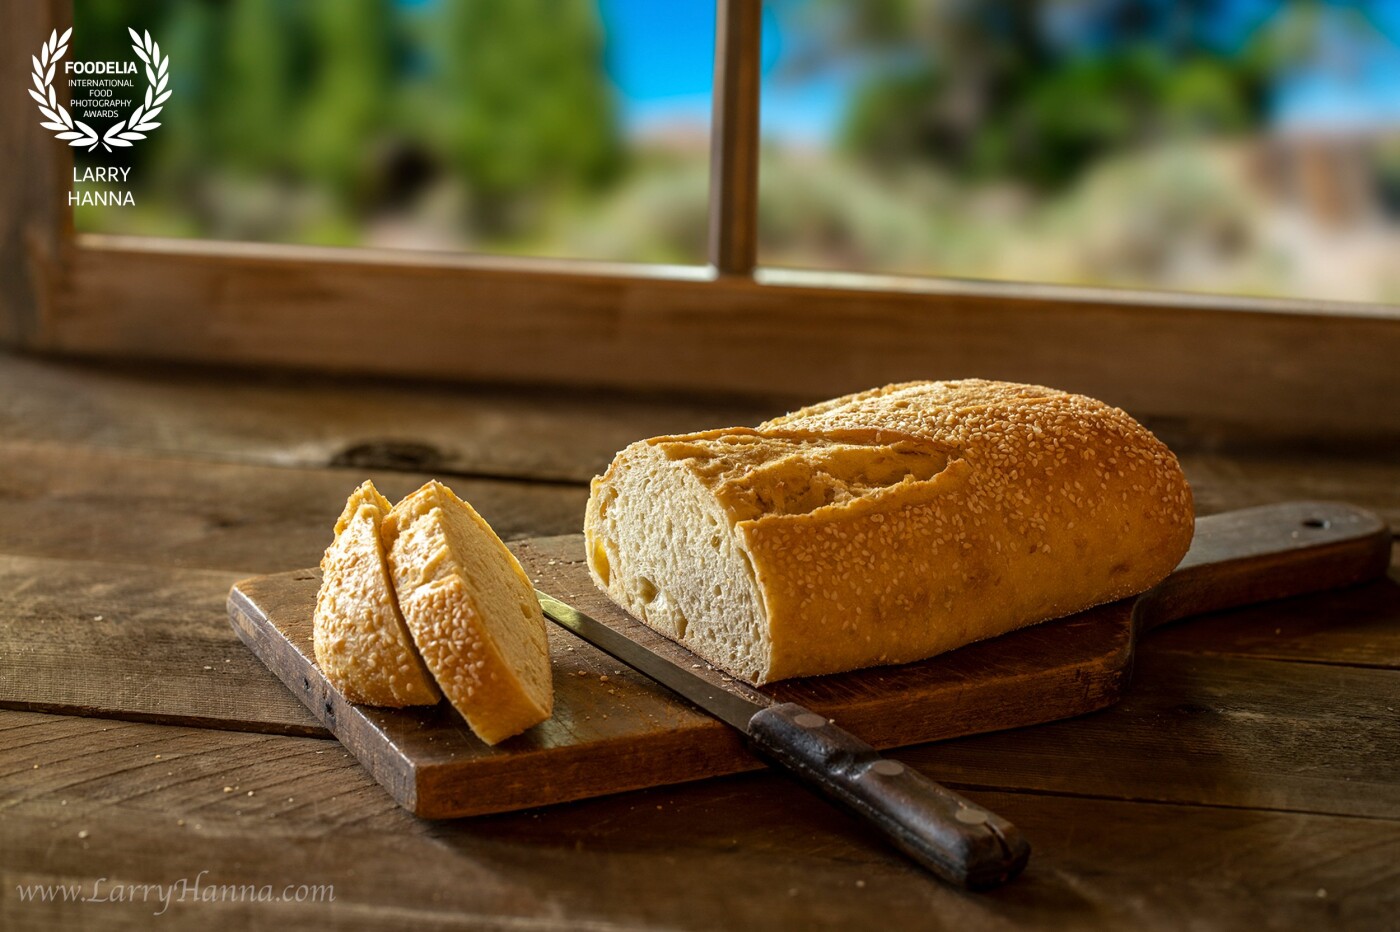 I love the texture of bread and created this set in my kitchen.  The background is an image I took in central Nevada that I composited in using Photoshop.